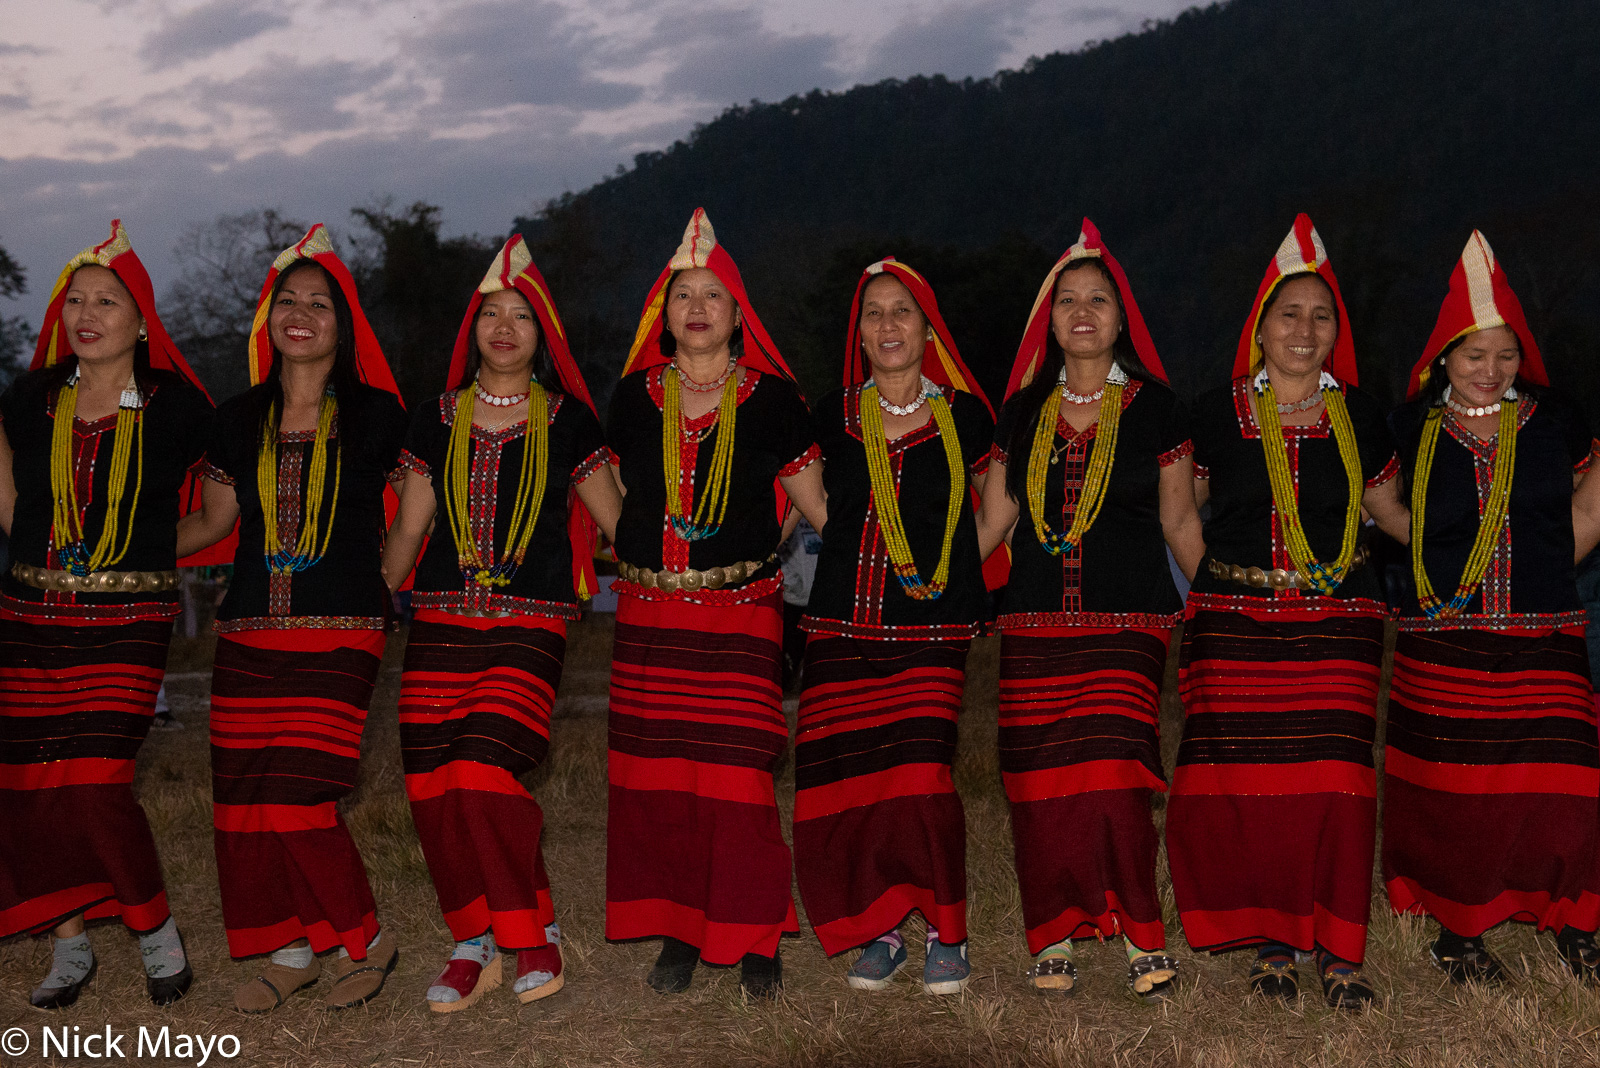 Adi Minyong women in traditional dress dancing at the Yomgo festival held at Aalo in the Siang valley.